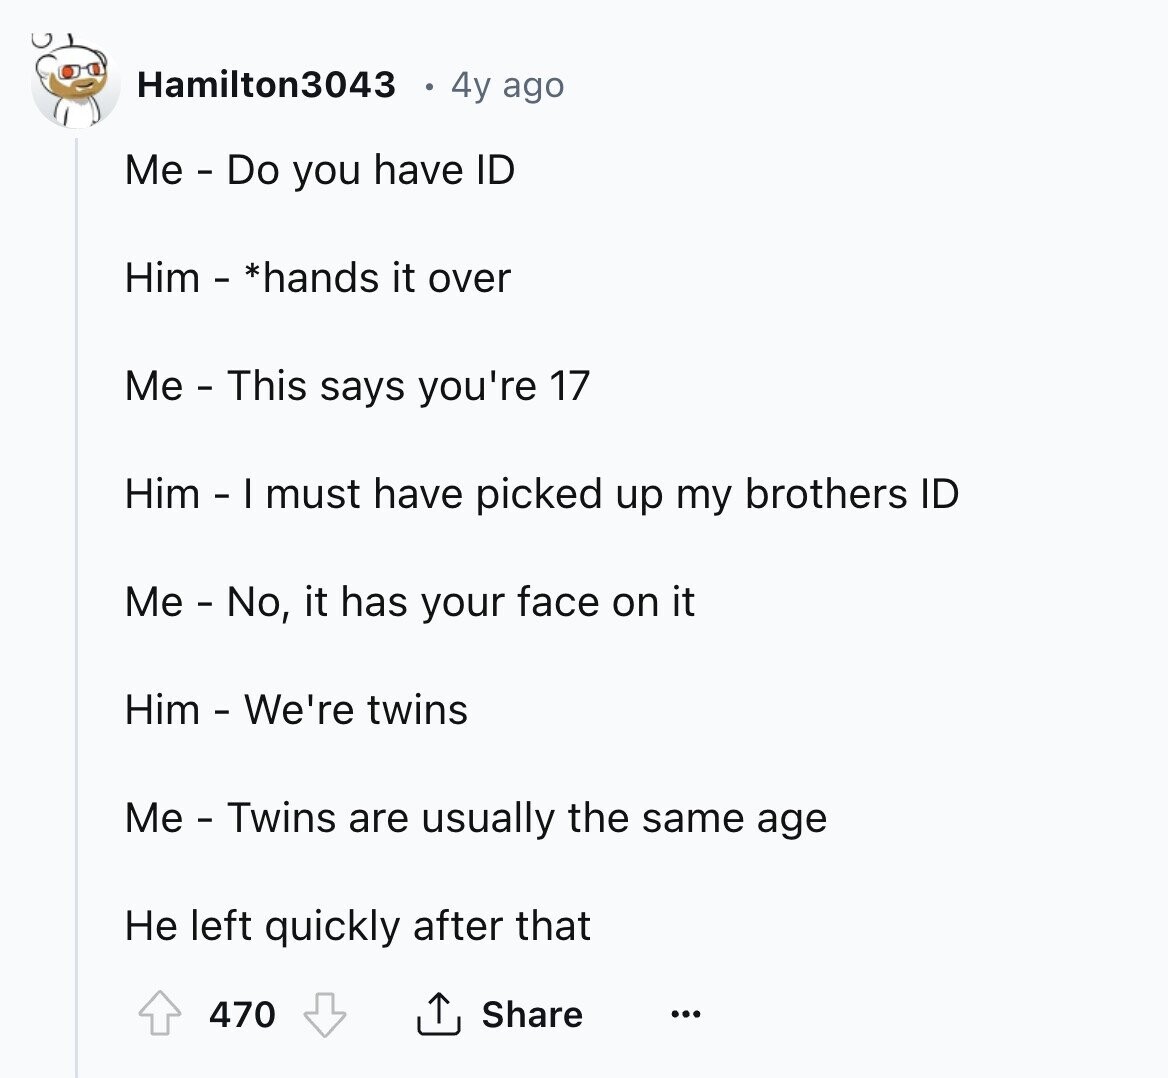 Hamilton3043 4y ago Me - Do you have ID Him - *hands it over Me - This says you're 17 Him - I must have picked up my brothers ID Me - No, it has your face on it Him - We're twins Me - Twins are usually the same age Не left quickly after that Share 470 ... 